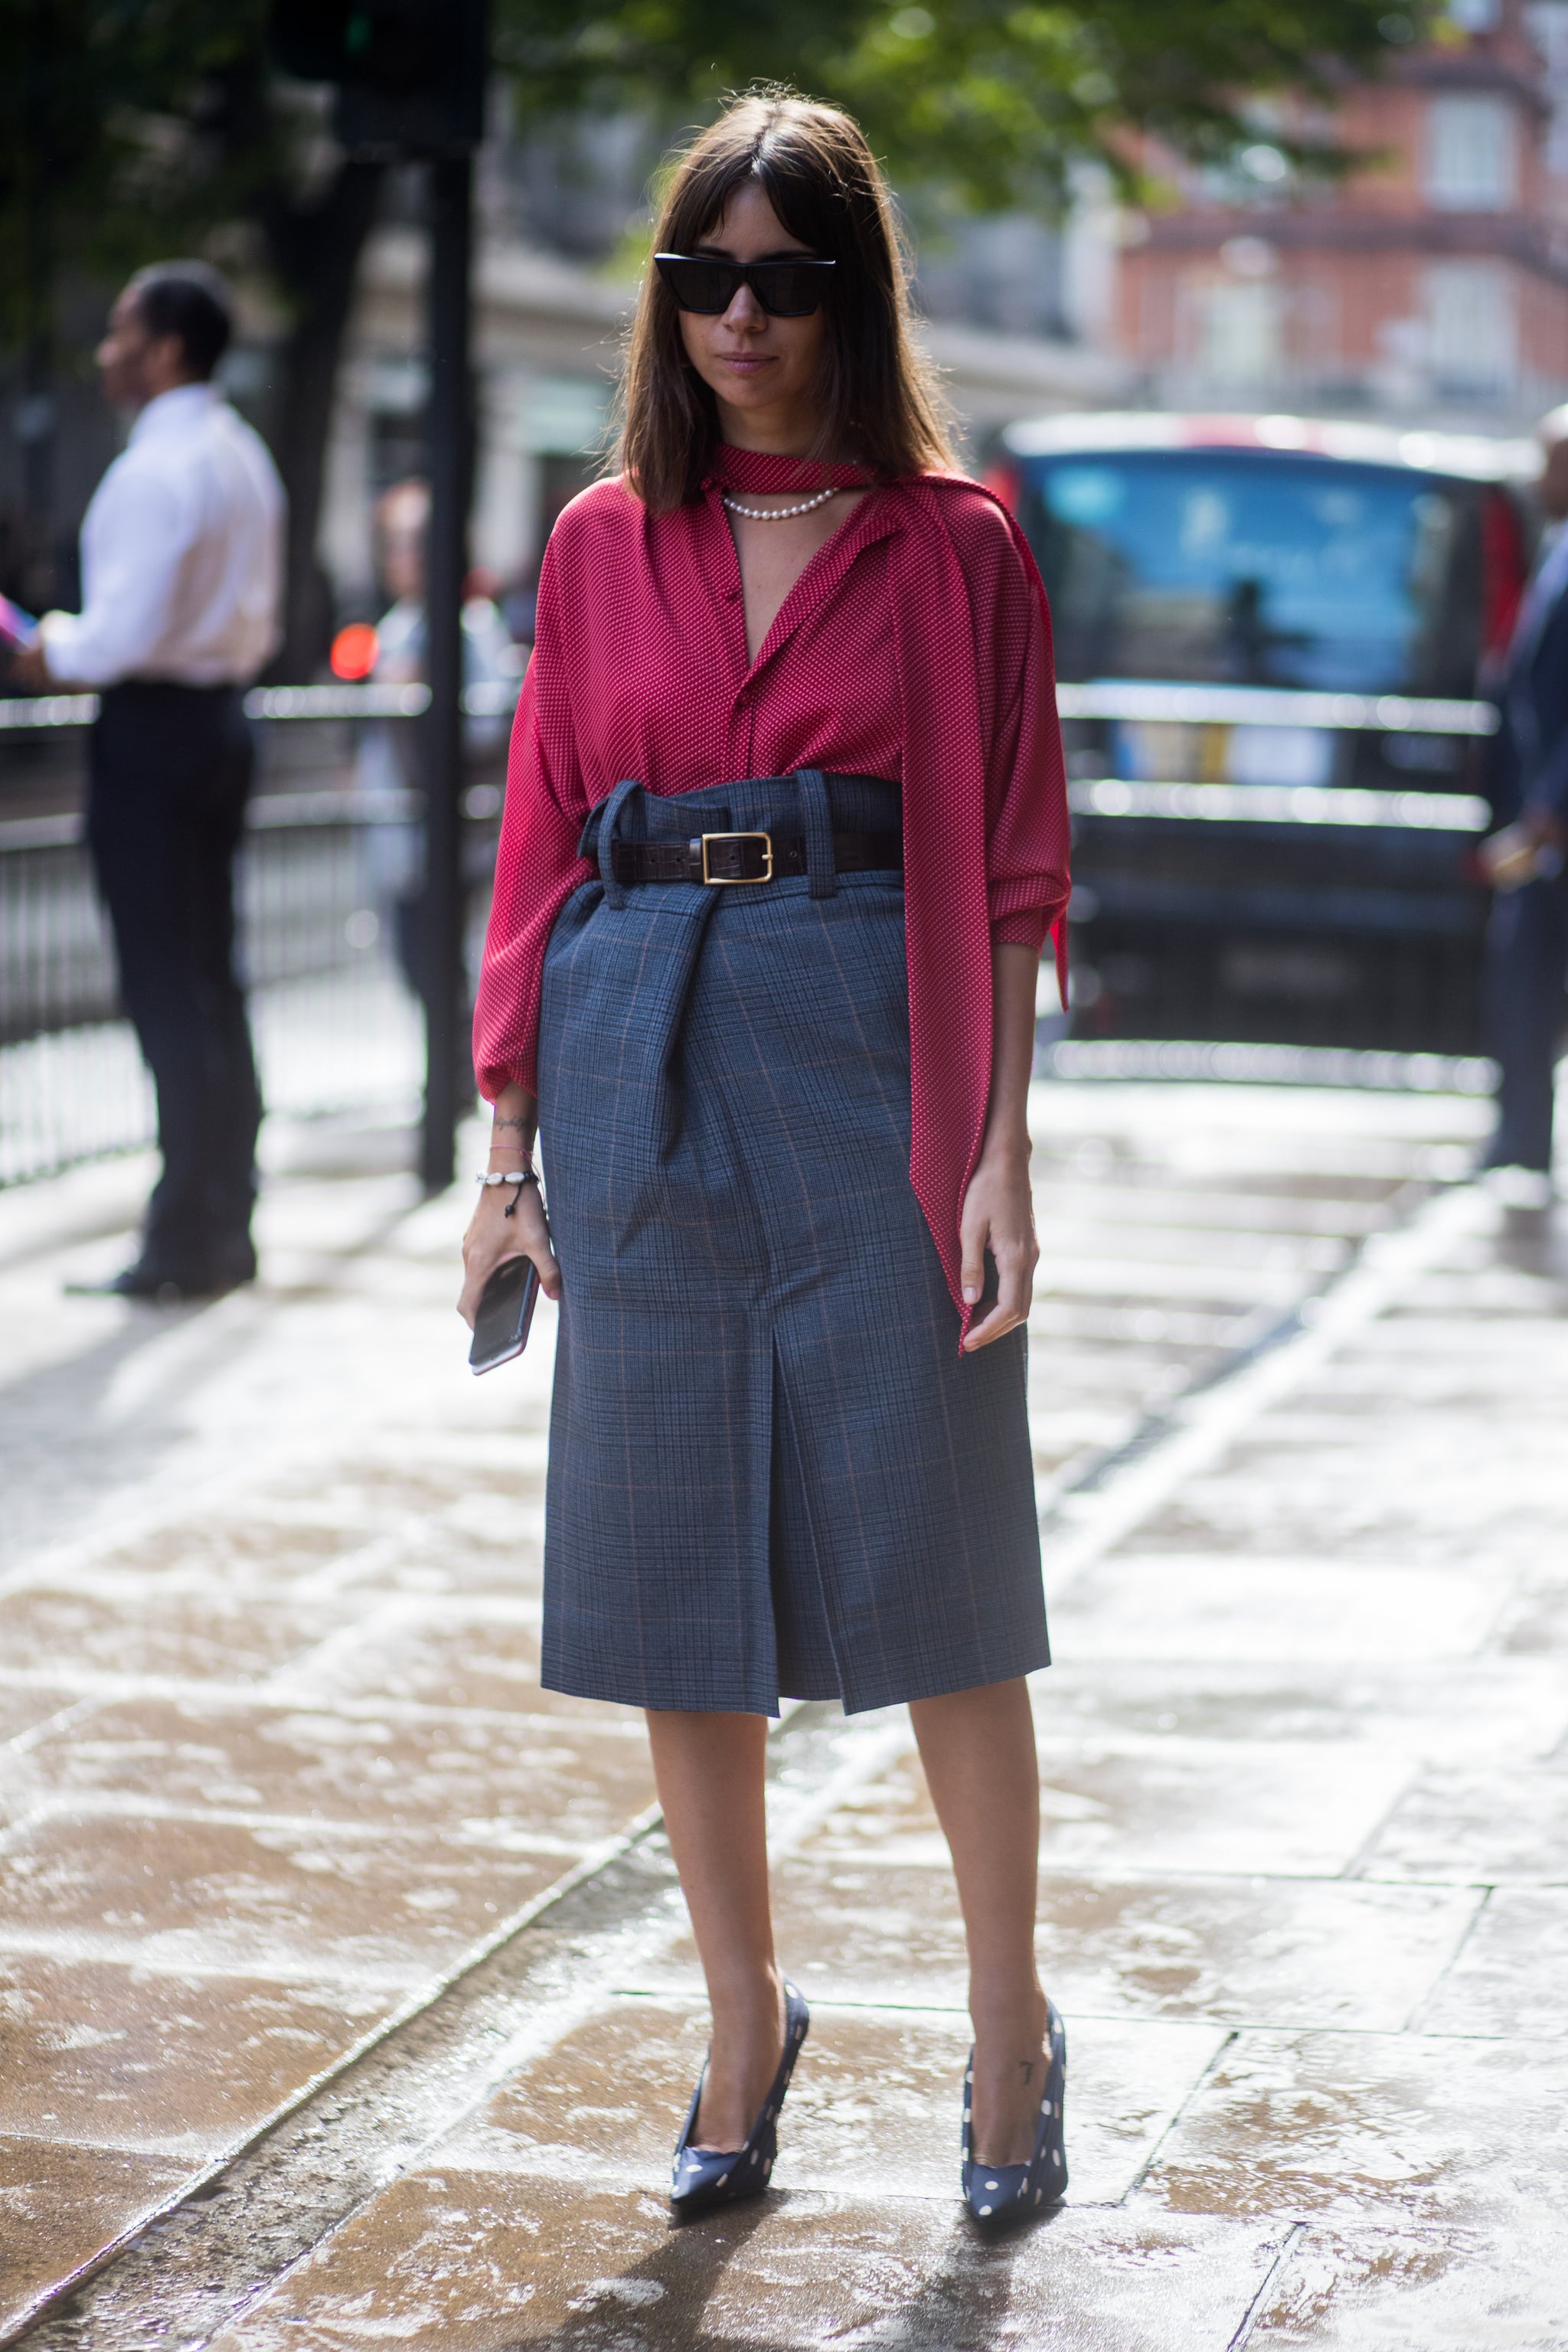 Fully Tucked in a High-Waisted Skirt With Neck Ties Creating Length, 31  Chic Ways to Style and Tuck Your Favourite Shirt This Spring